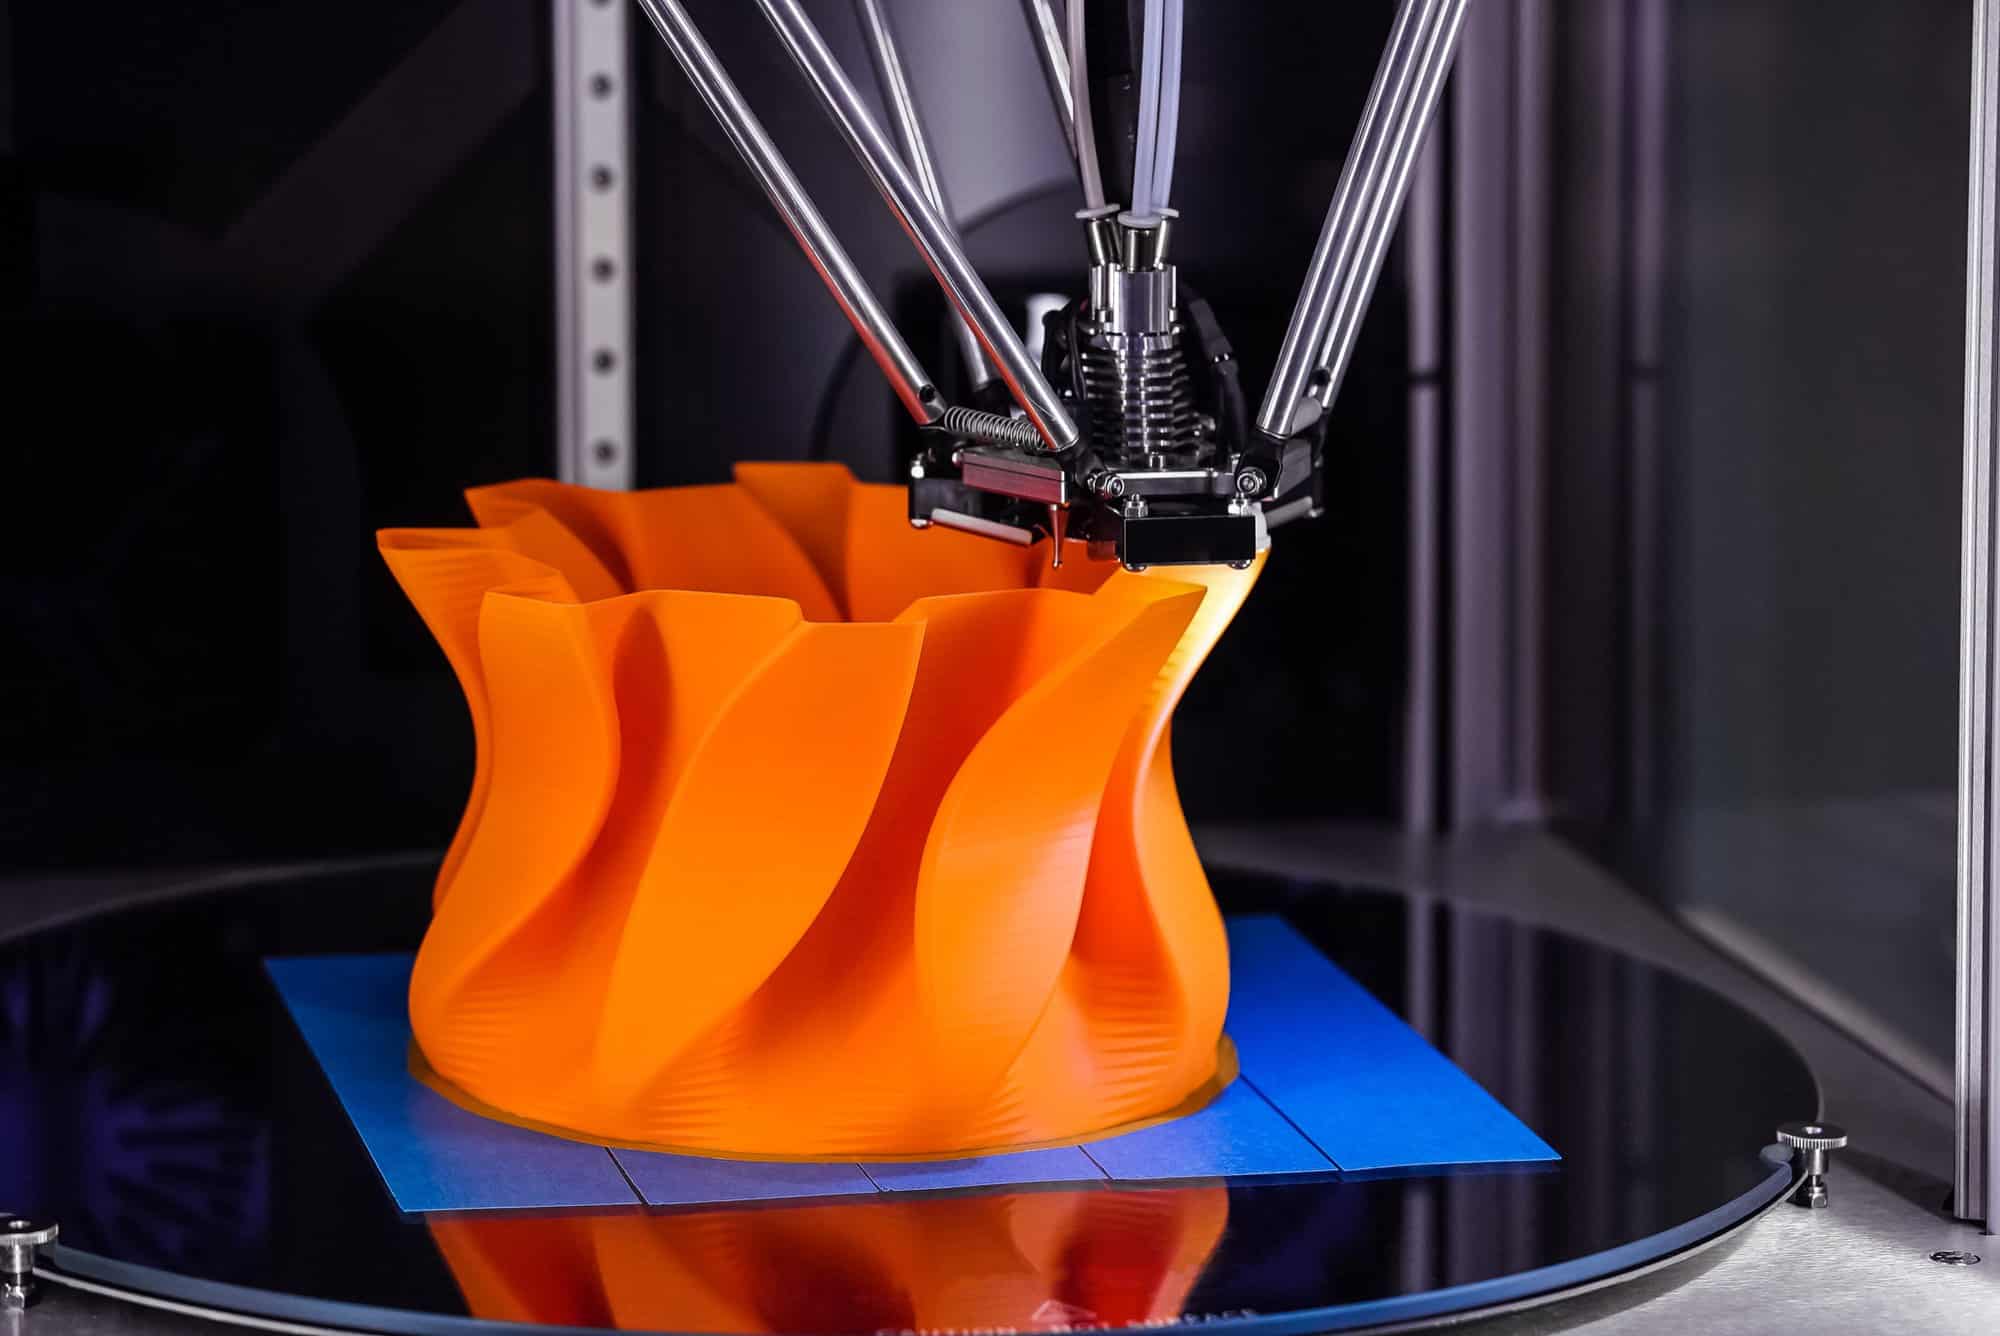 New 3-D printer is 10 times faster than commercial counterparts, MIT News